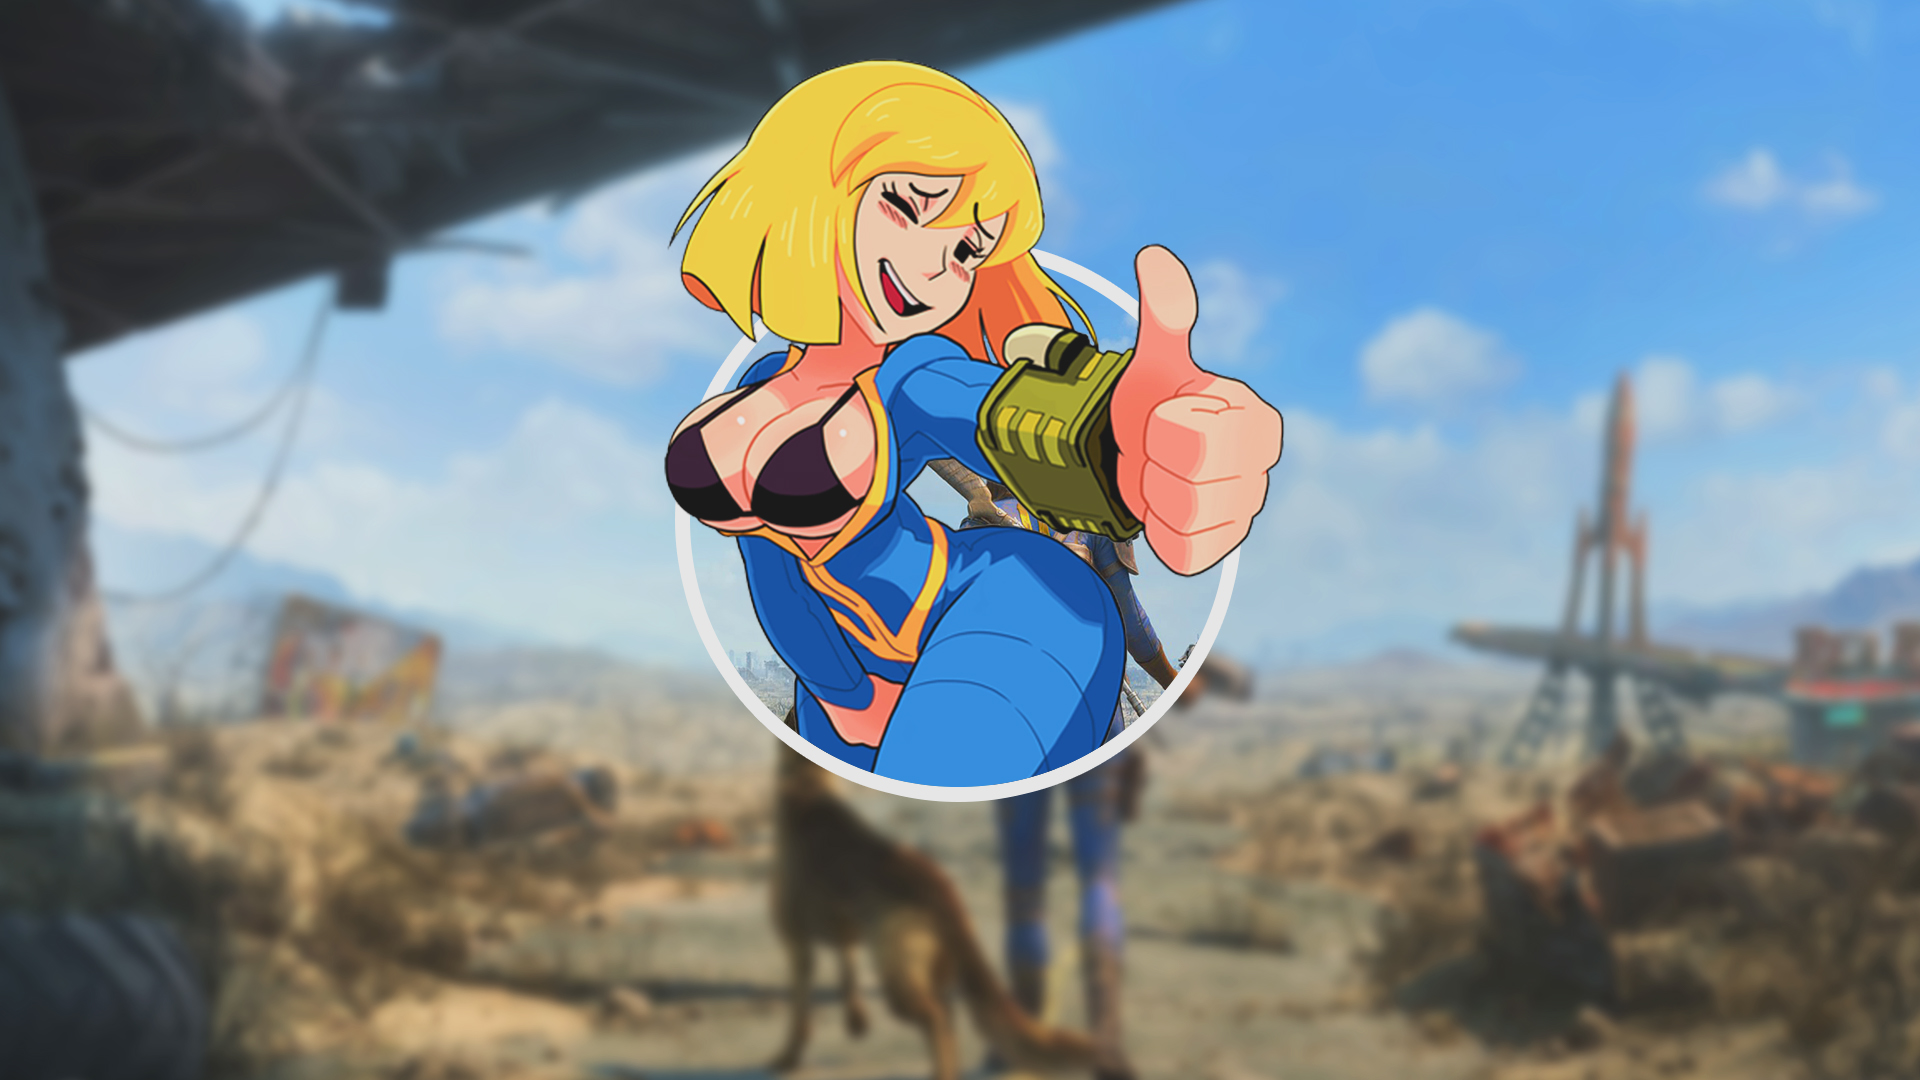 General 1920x1080 Fallout Fallout 4 vault girl video games picture-in-picture Shadbase suggestive